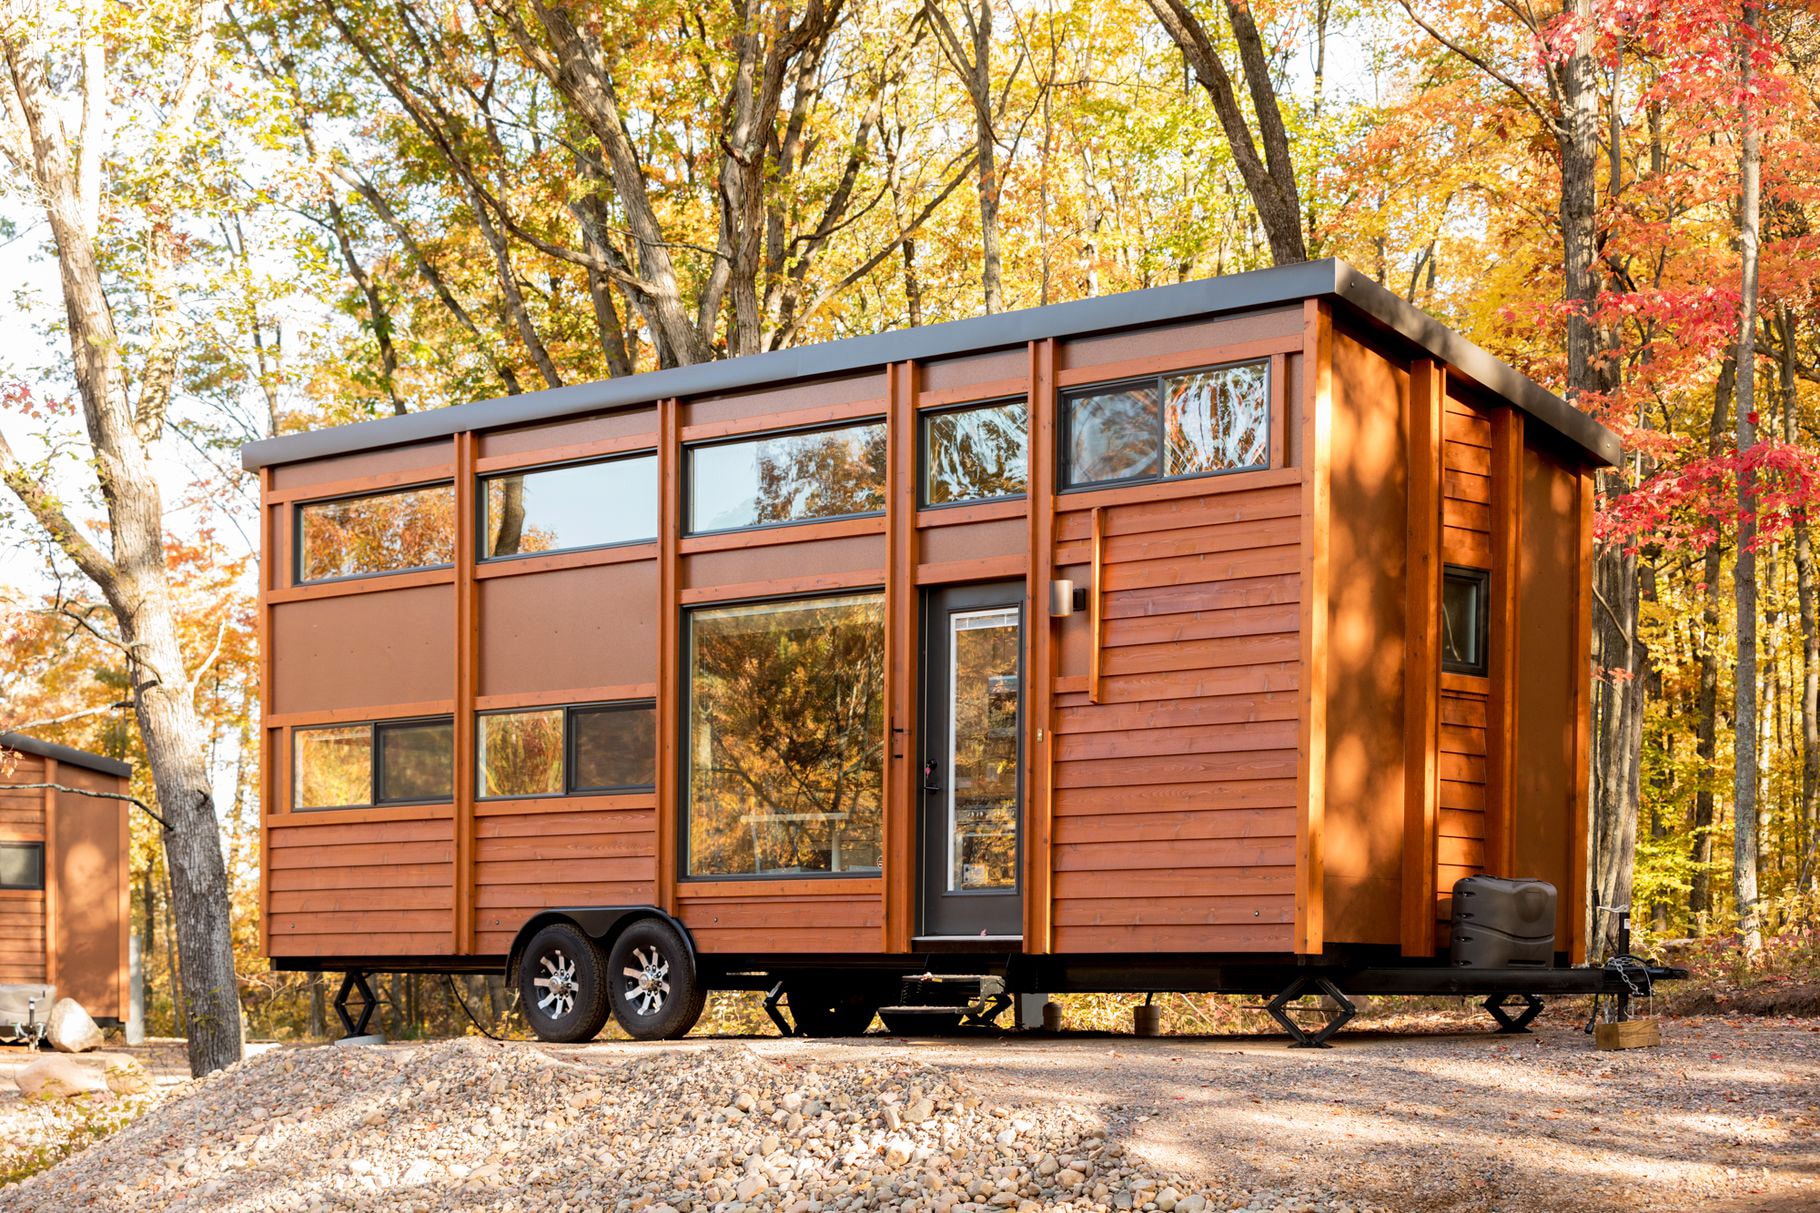 Canoe Bay Escape Village Unveils Tiny Homes hotels traveler trailer RV small houses tiny hotels Wisconsin nature getaway